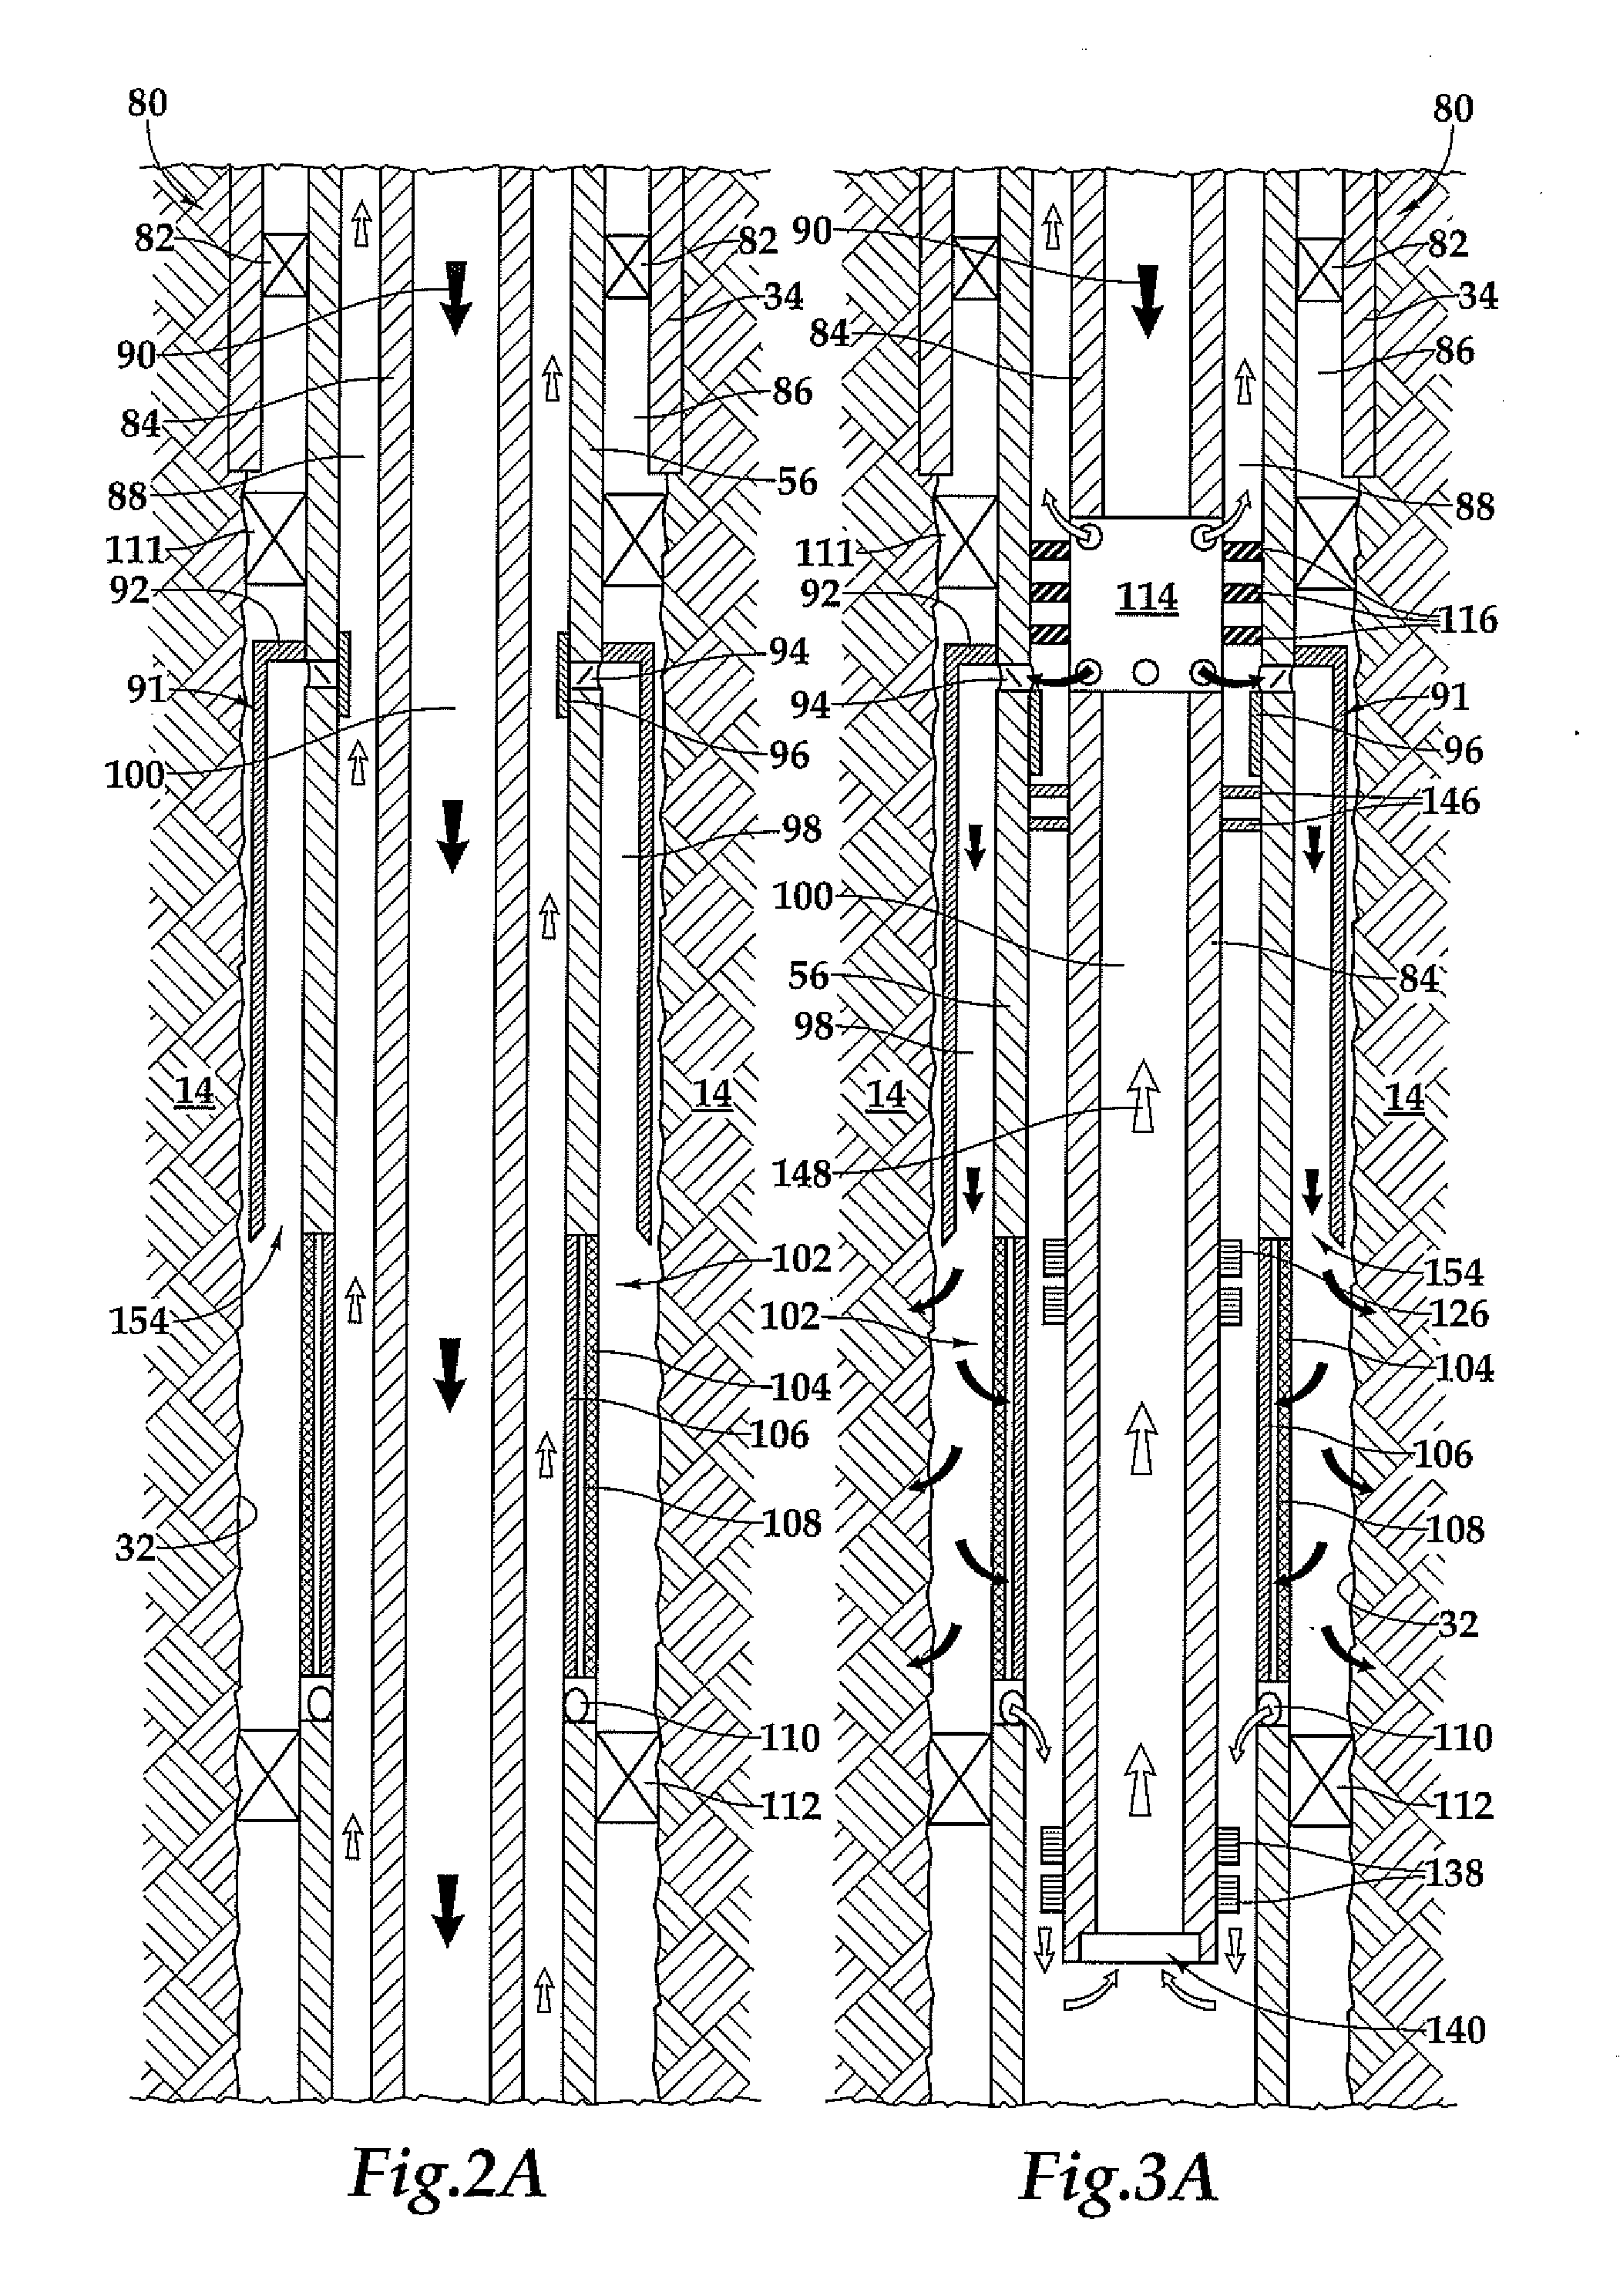 Open Hole Completion Apparatus and Method for Use of Same